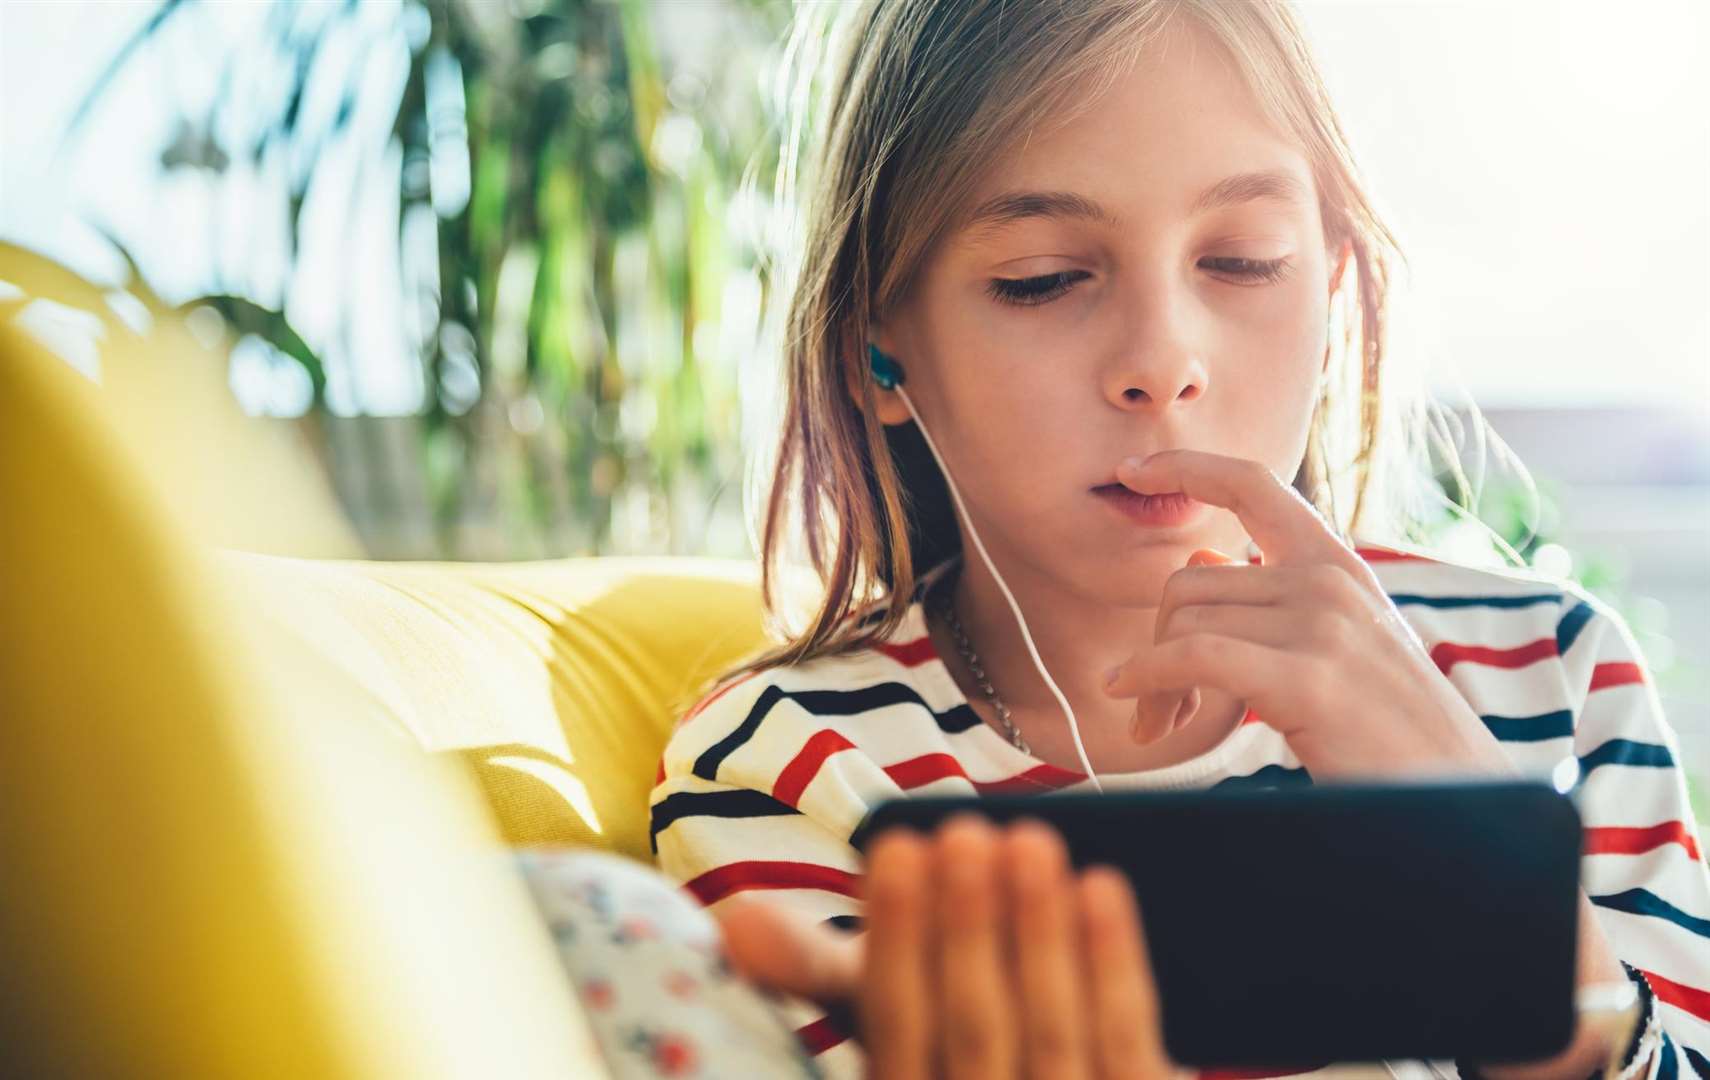 Communication with your child is key to keeping them safe online